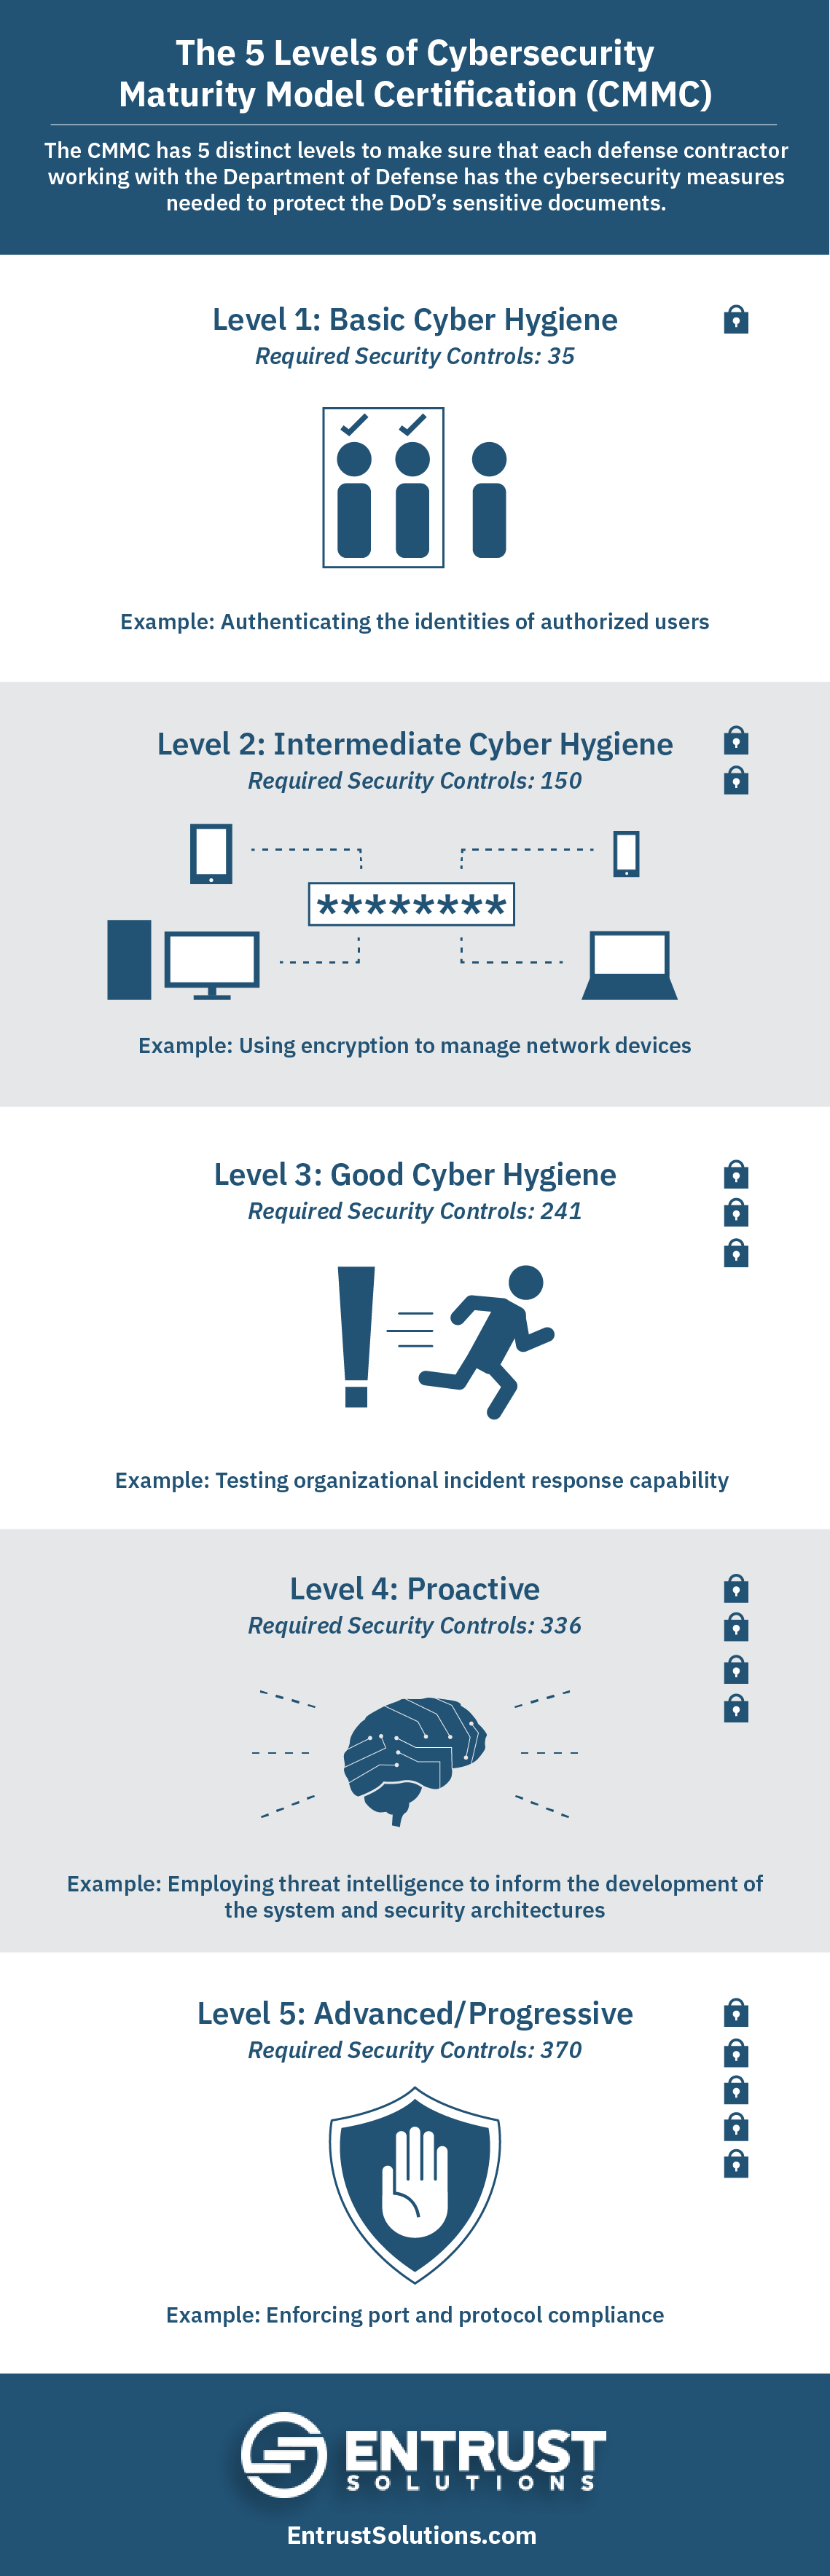 An infographic explaining the 5 levels of Cybersecurity Maturity Model Certification (CMMC) for defense contractors.